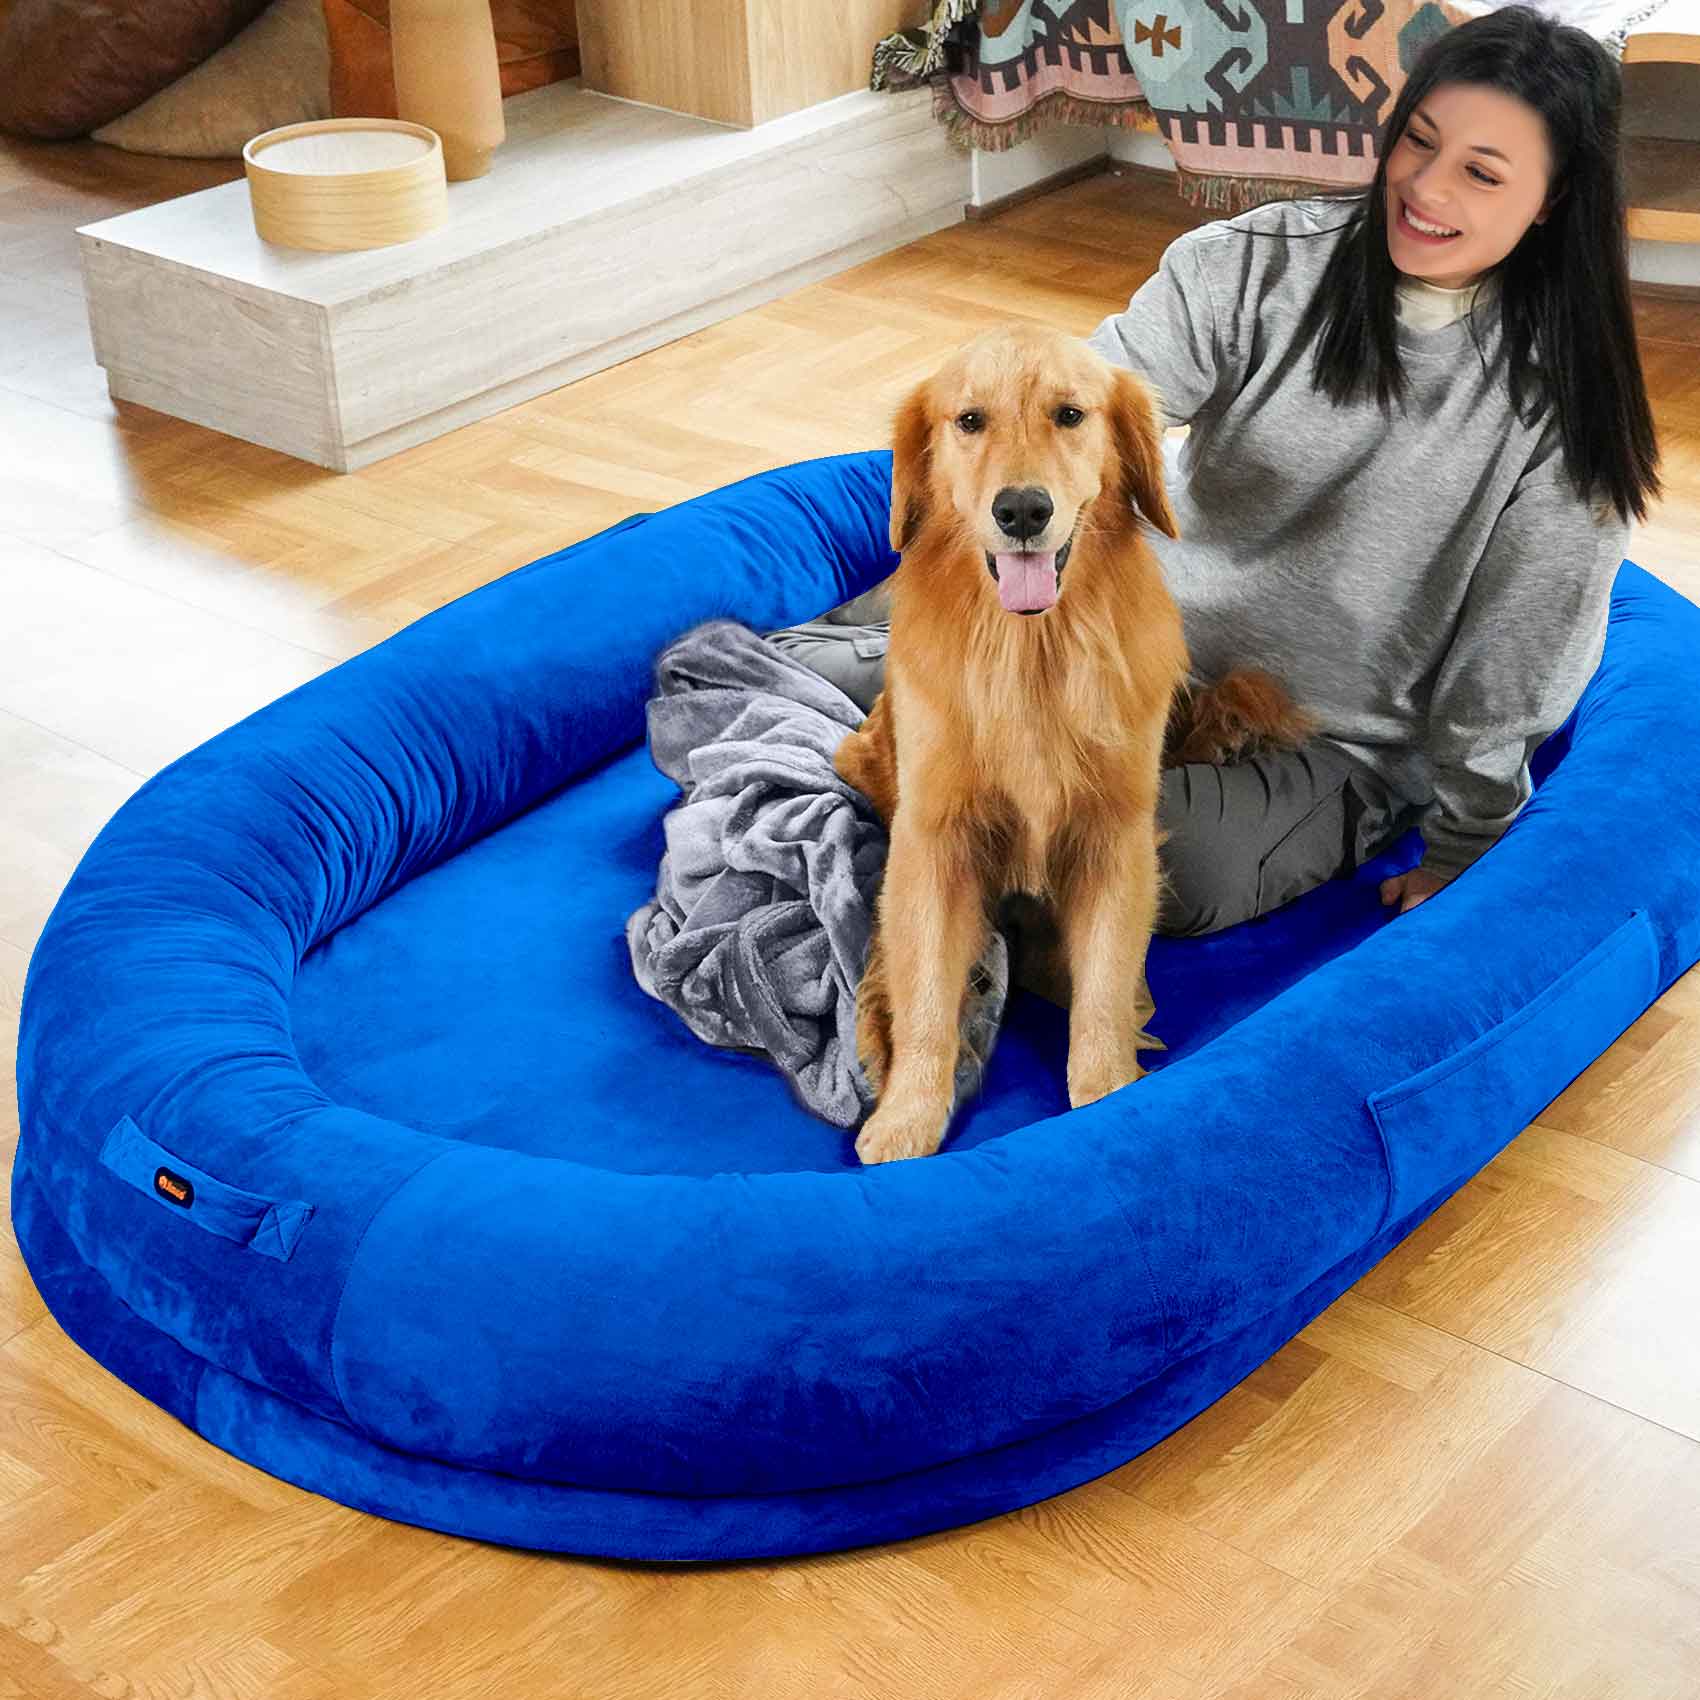 Human Dog Bed for People,70